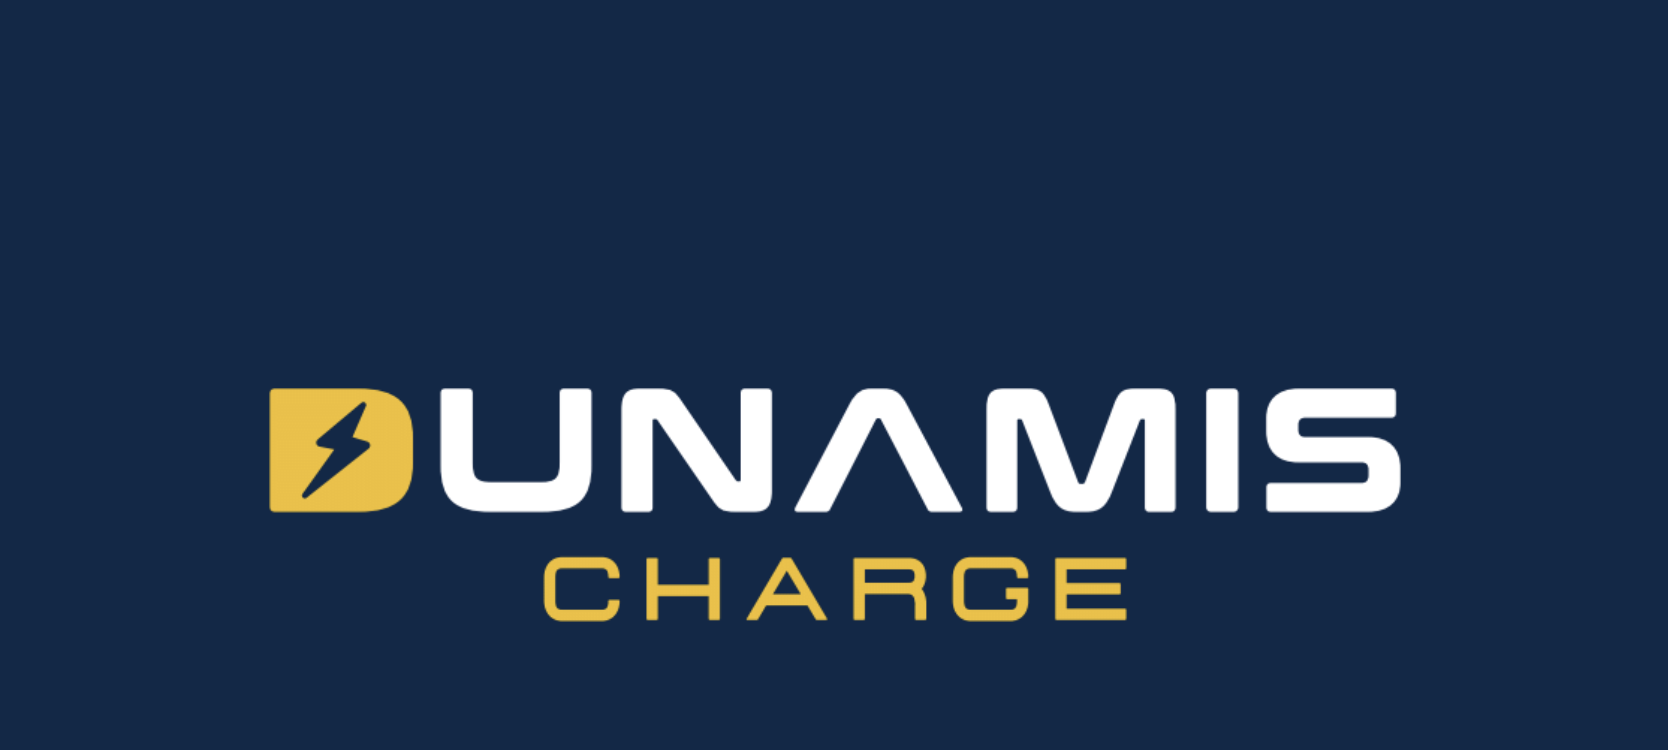 Dunamis Charge, Friday, June 9, 2023, Press release picture